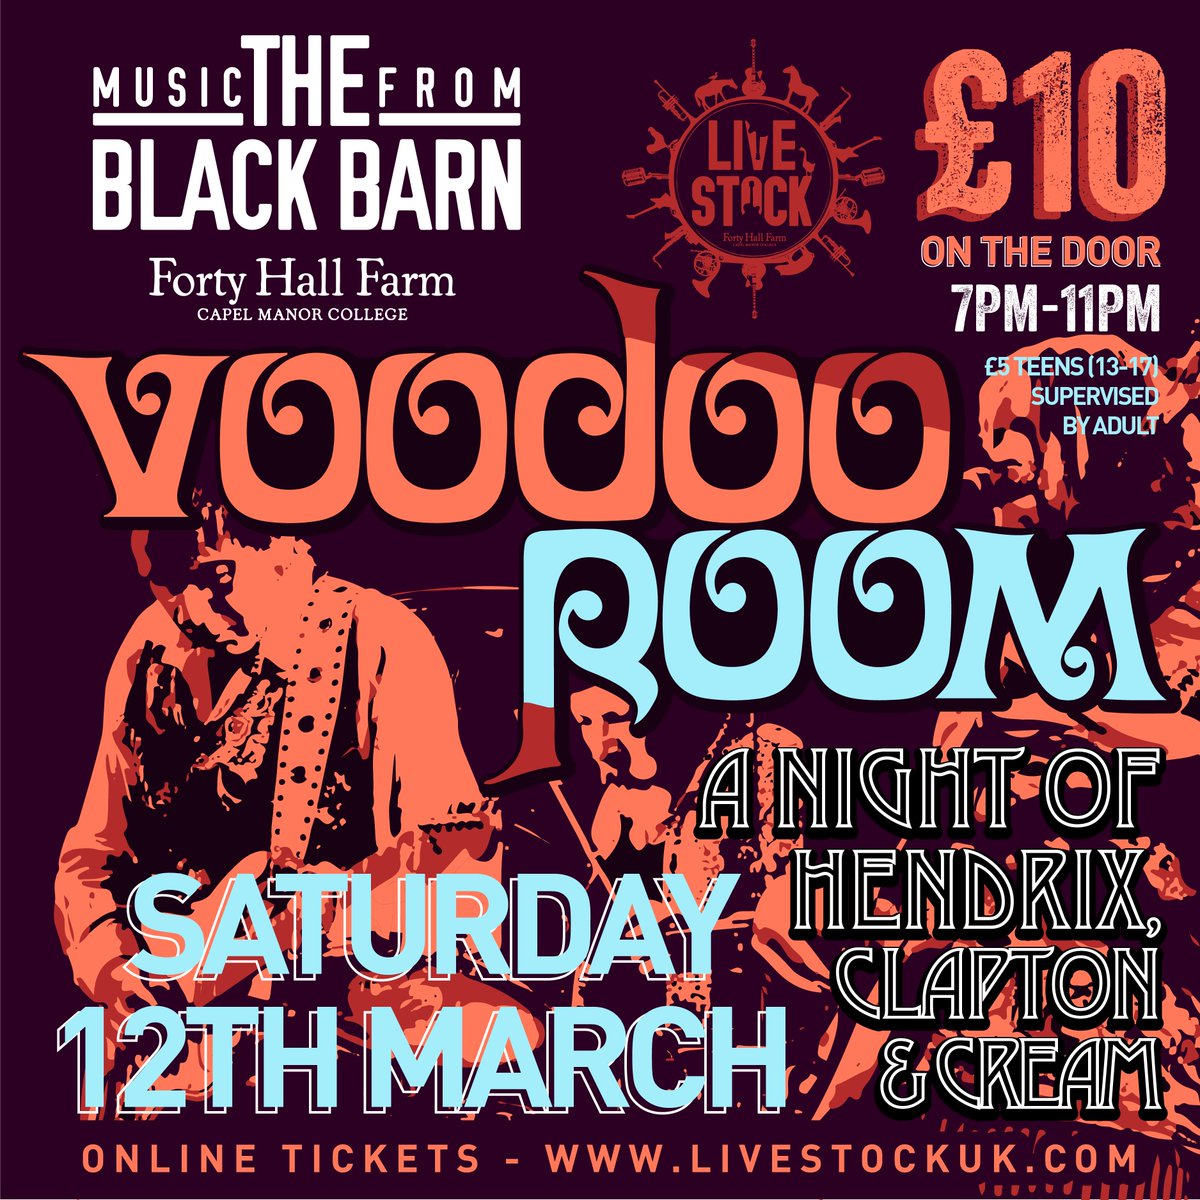 Coming up in March... Voodoo Room, A night of Hendrix, Clapton and Cream buytickets.at/livestockmusic…